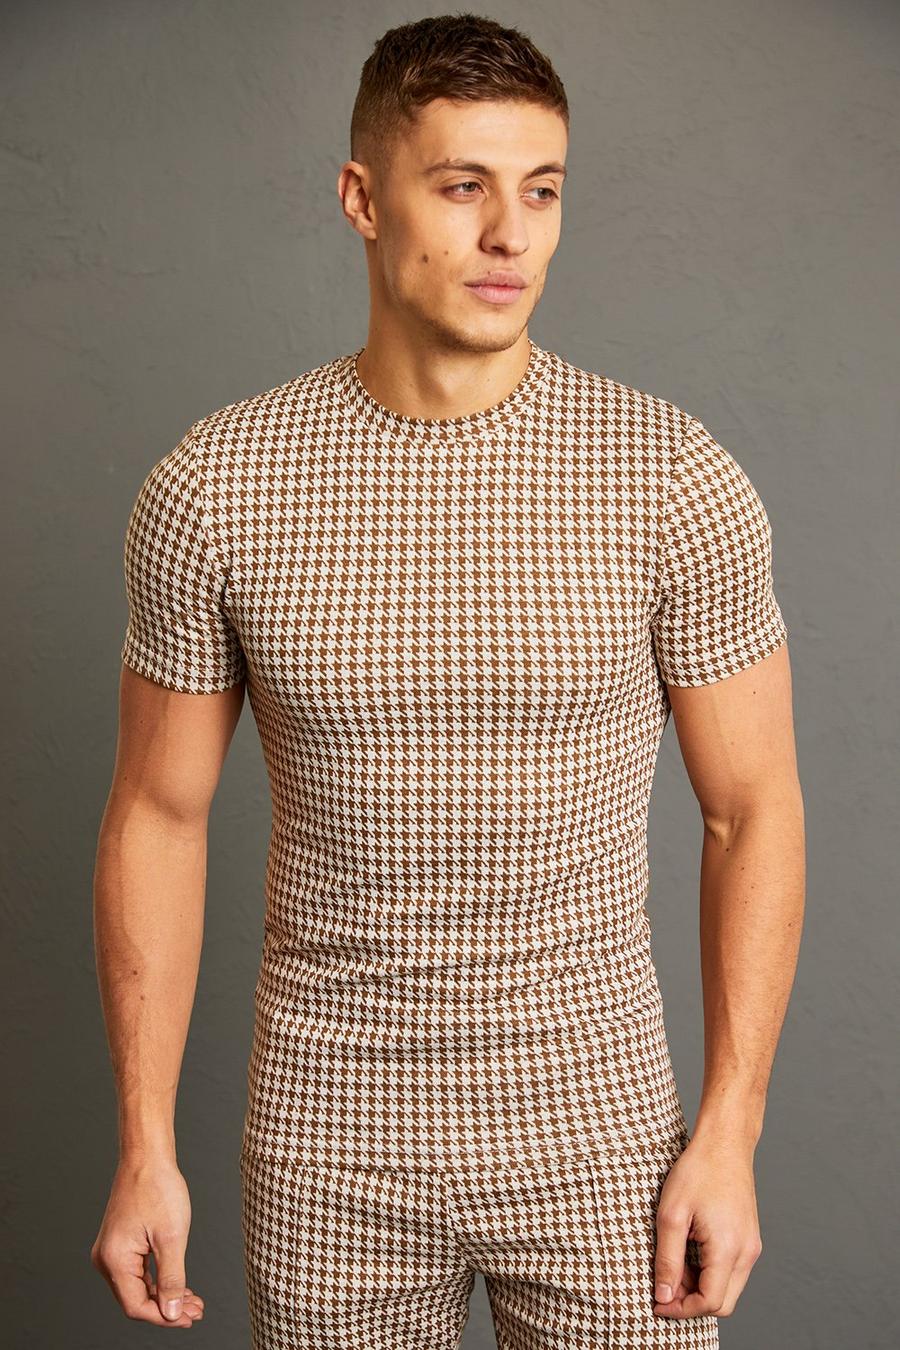 Chocolate brown Muscle Fit Houndstooth Jacquard T-shirt